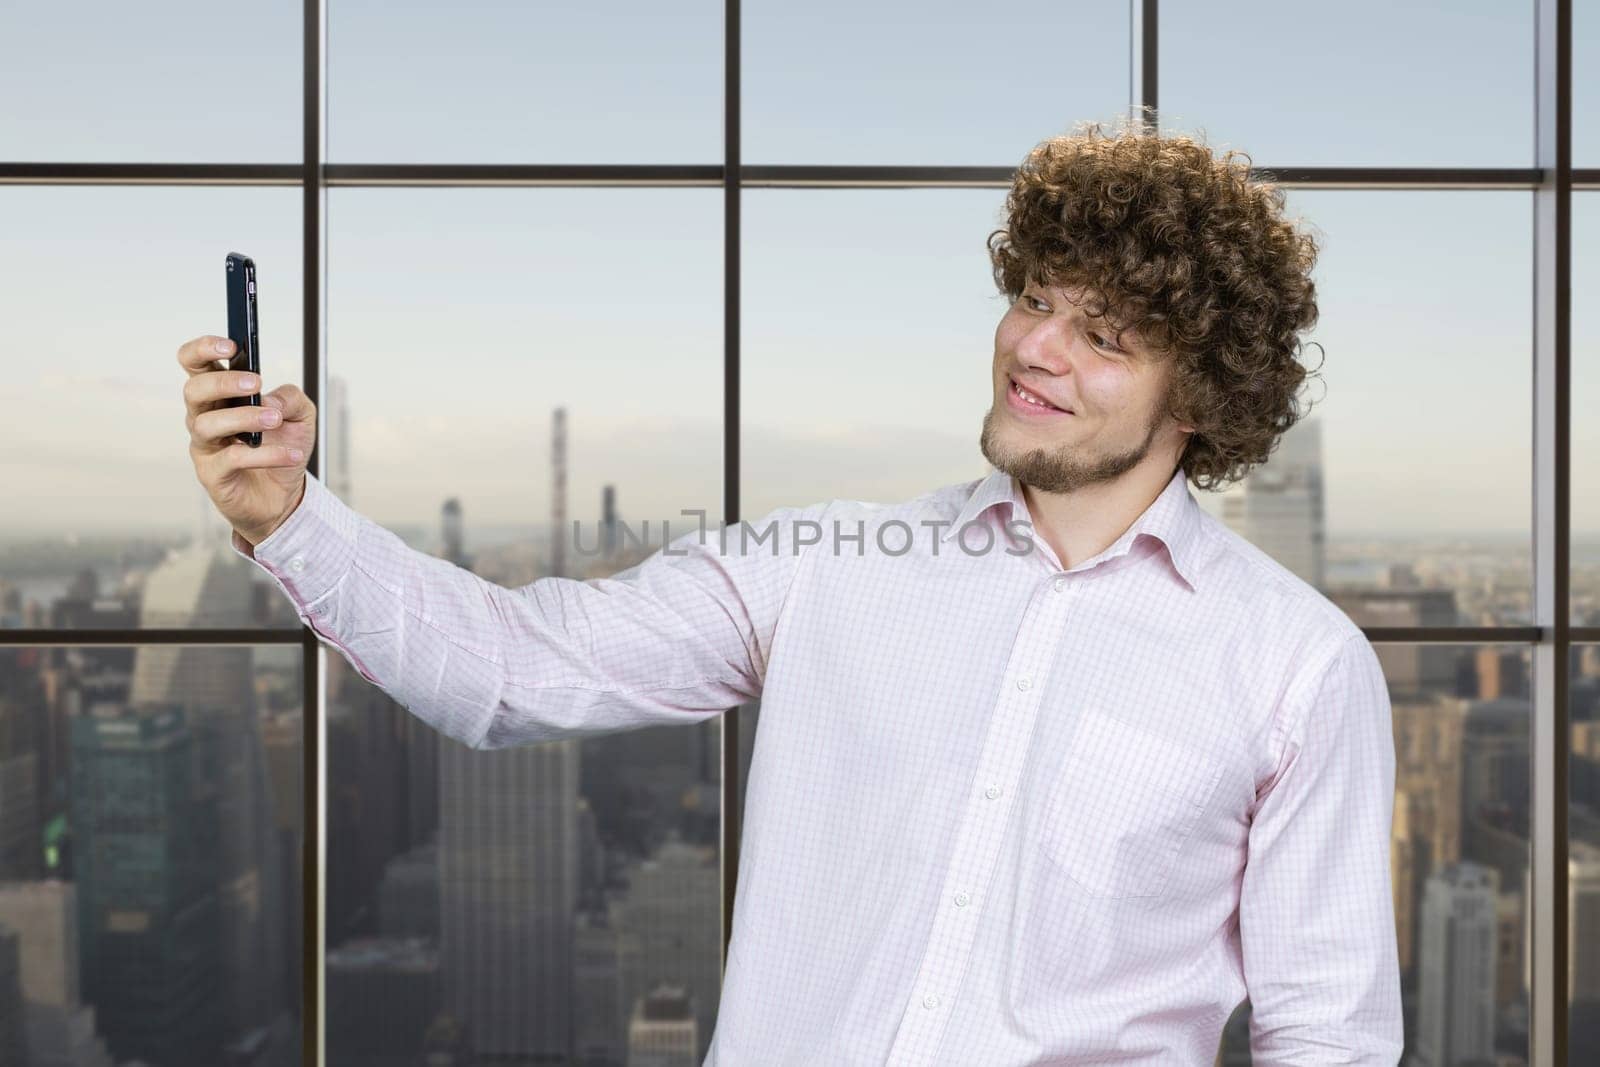 Young man with curly hair making a selfie and smiling with teeth. Indoor window with cityscape in the background.